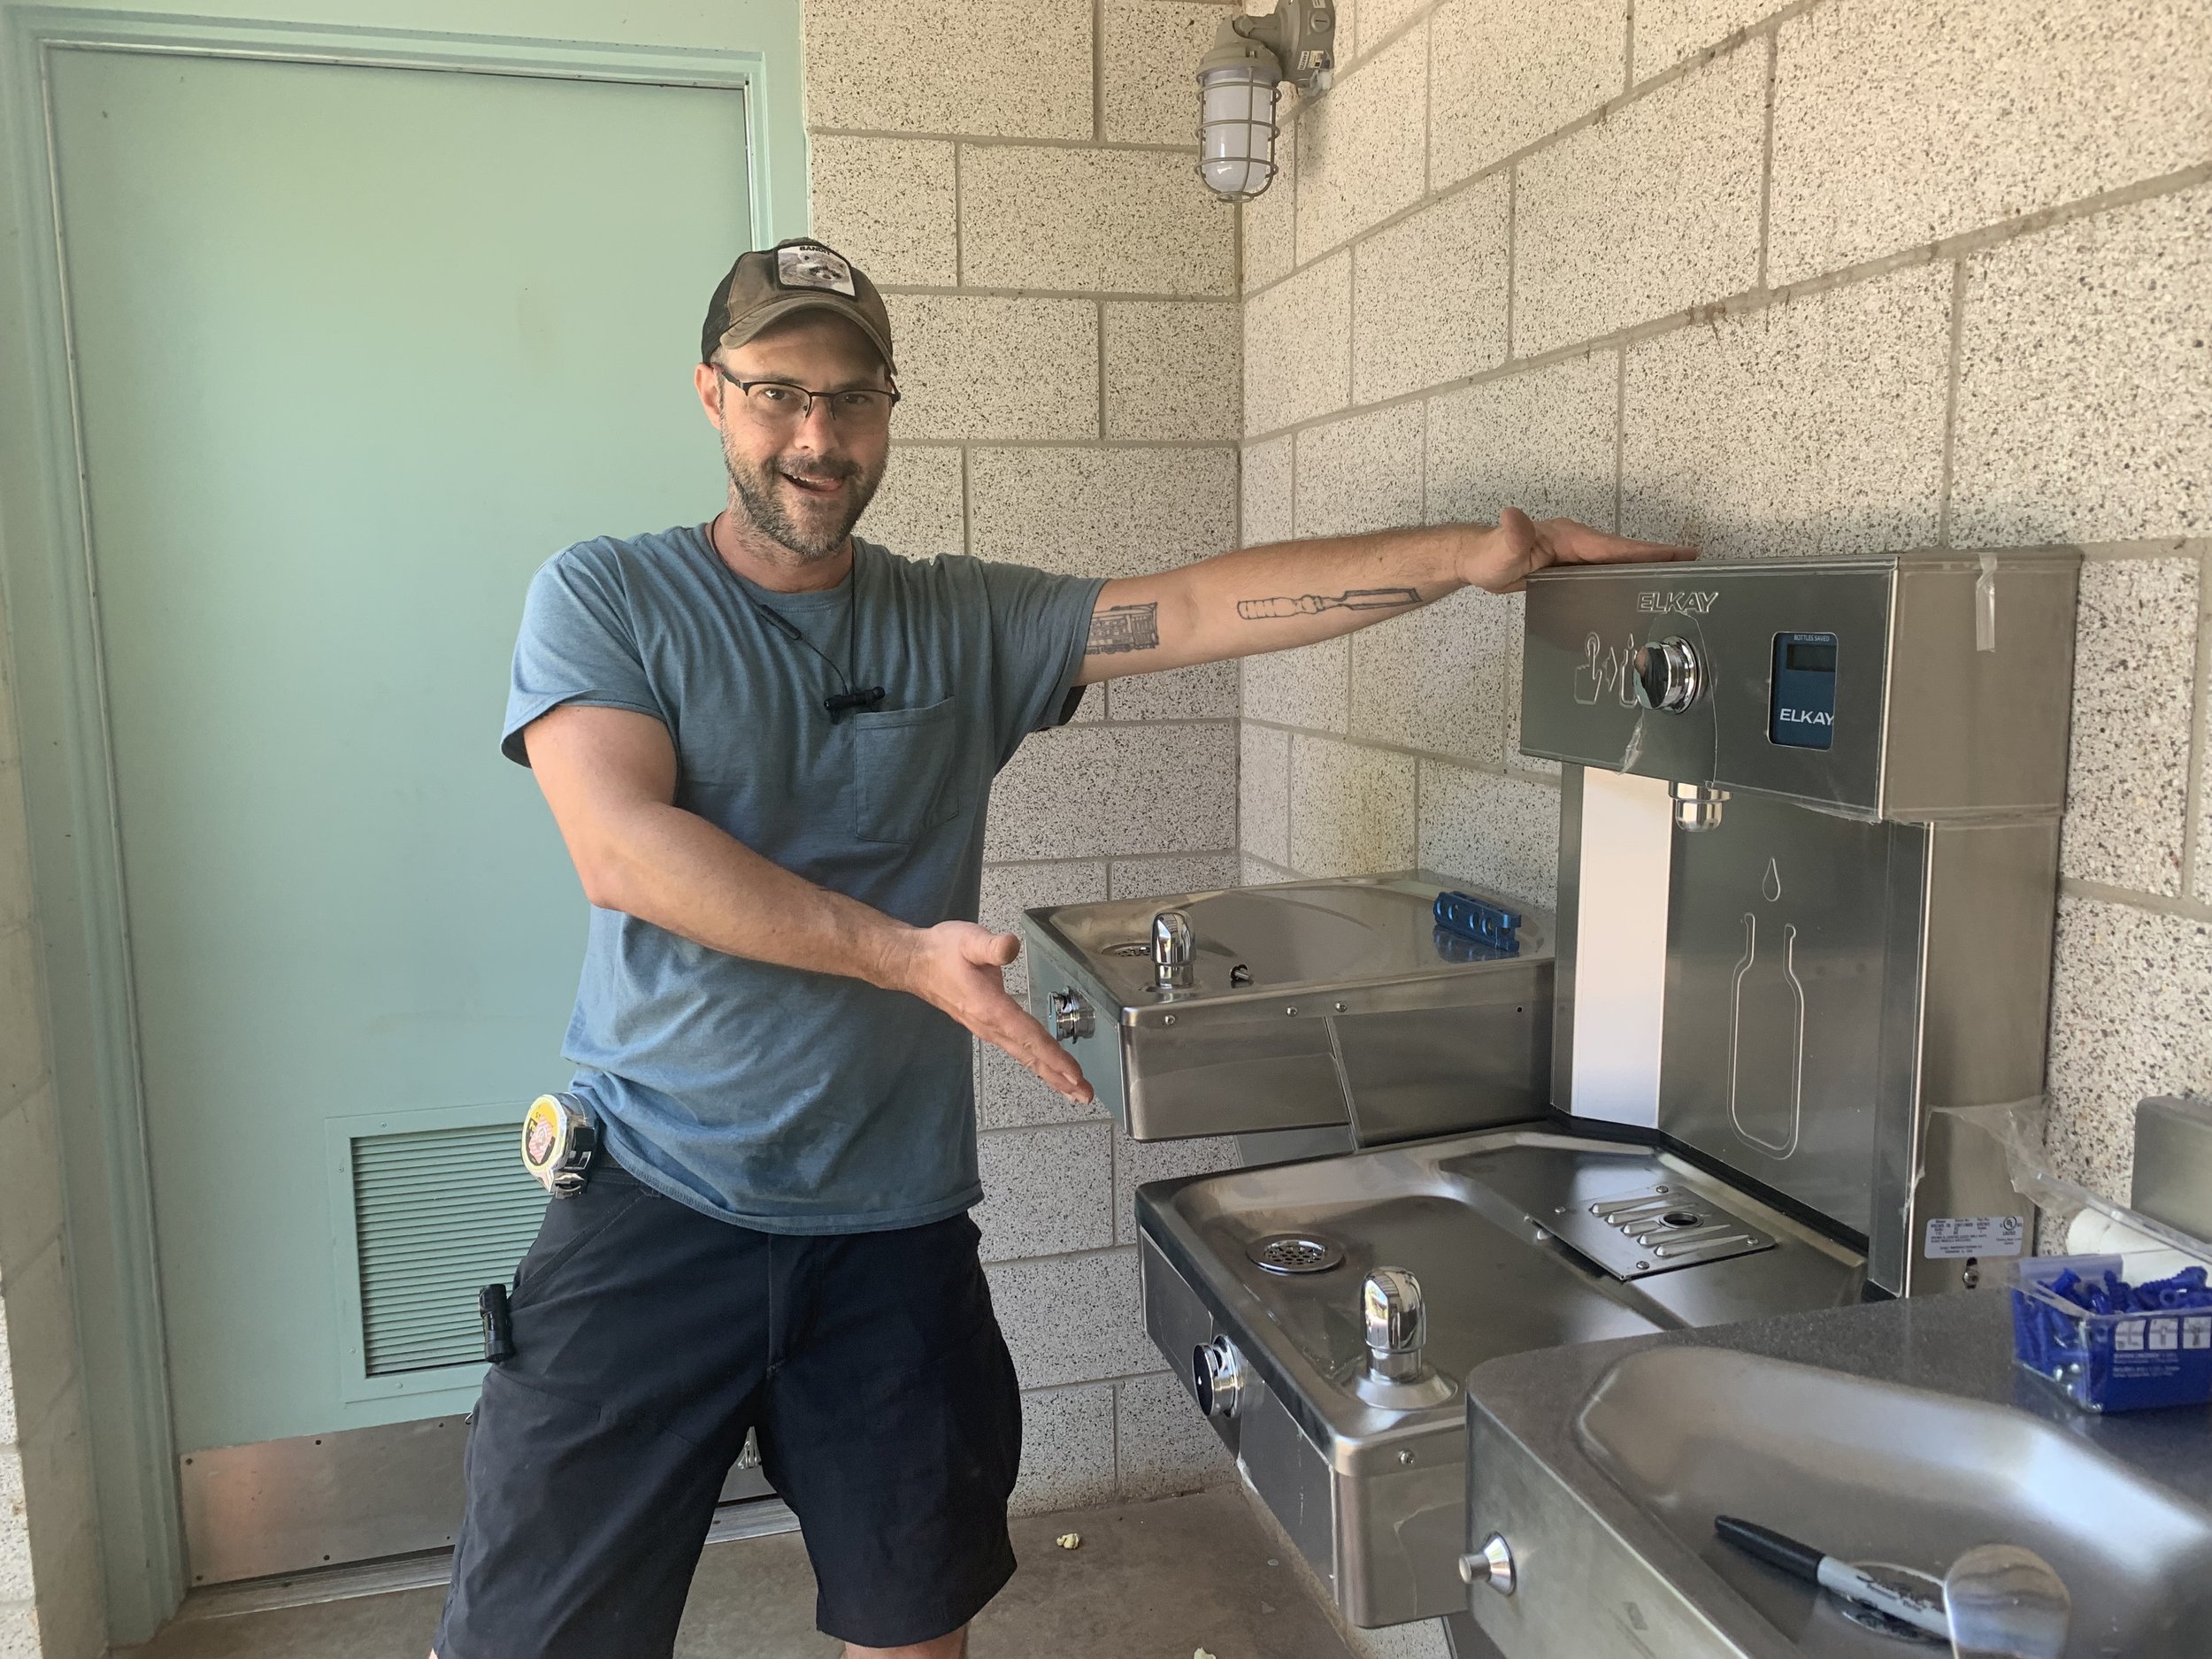    Trails and Facilities Maintenance Manager, Paul installs new water bottle filling stations!   